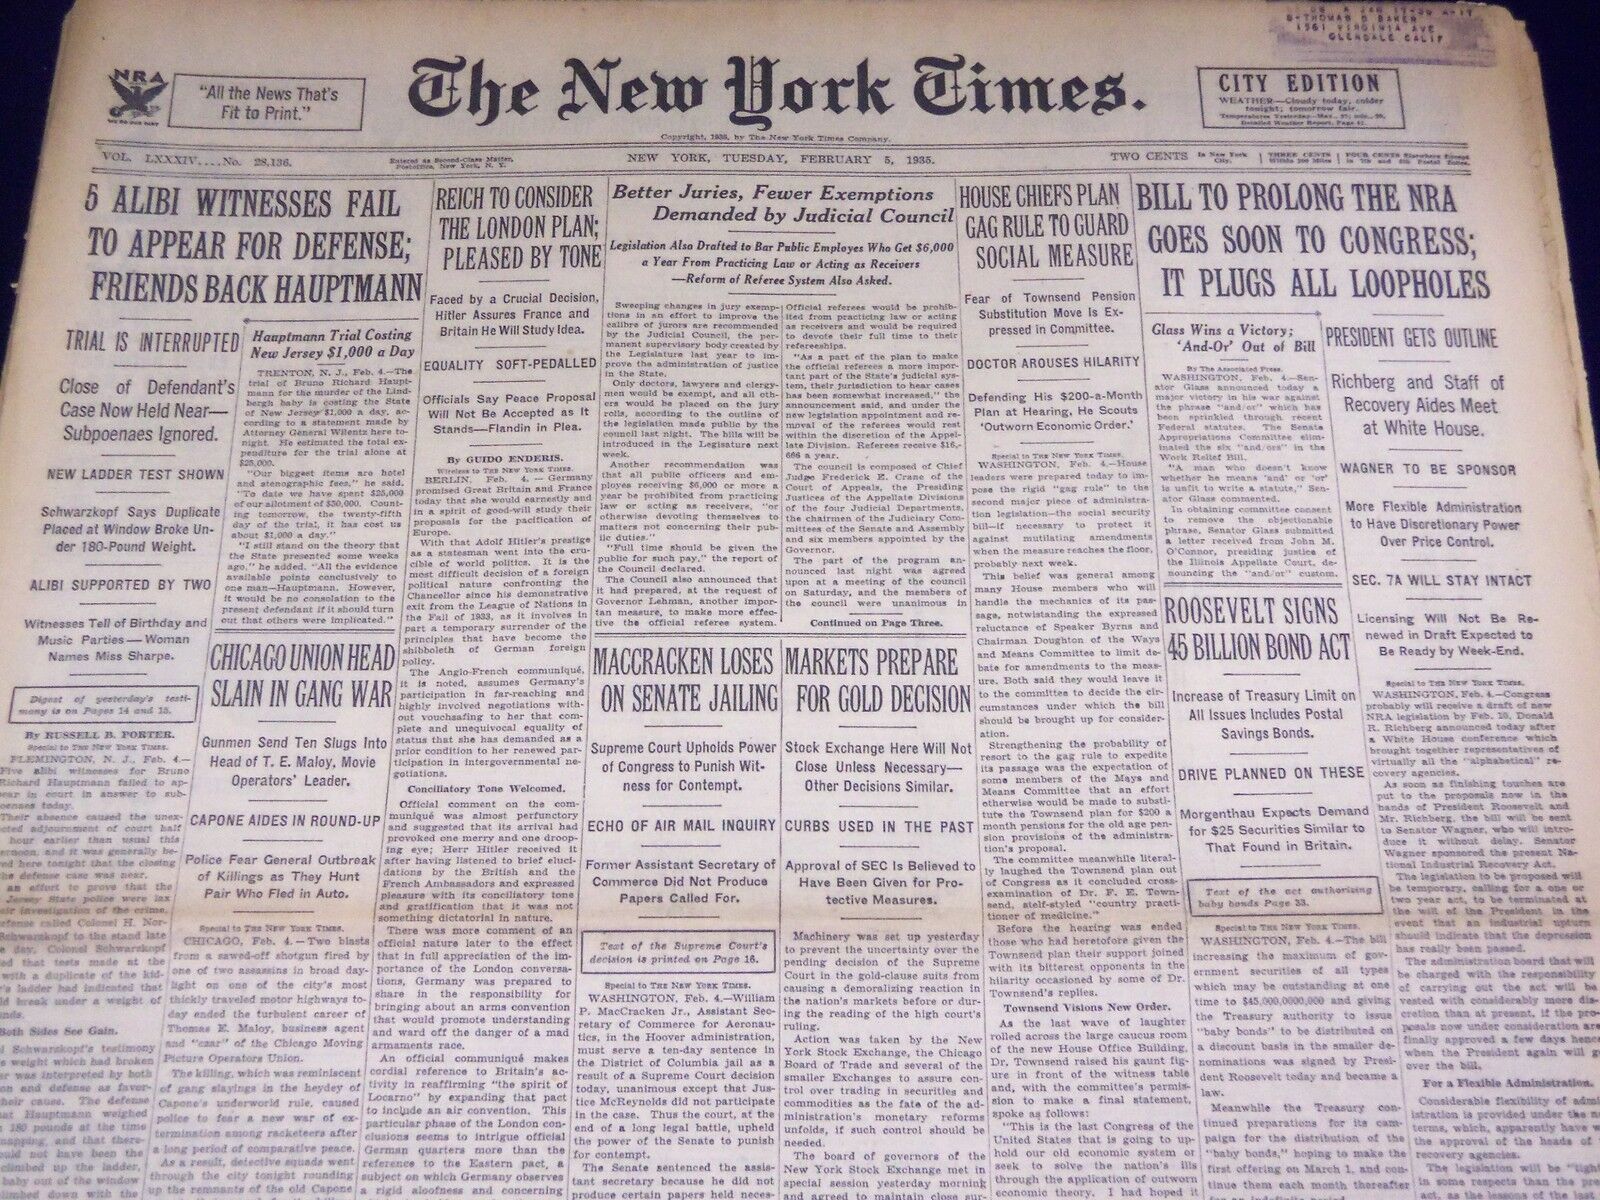 1935 FEB 5 NEW YORK TIMES - 5 ALIBI WITNESSES FAIL TO APPEAR DEFENSE - NT 1921